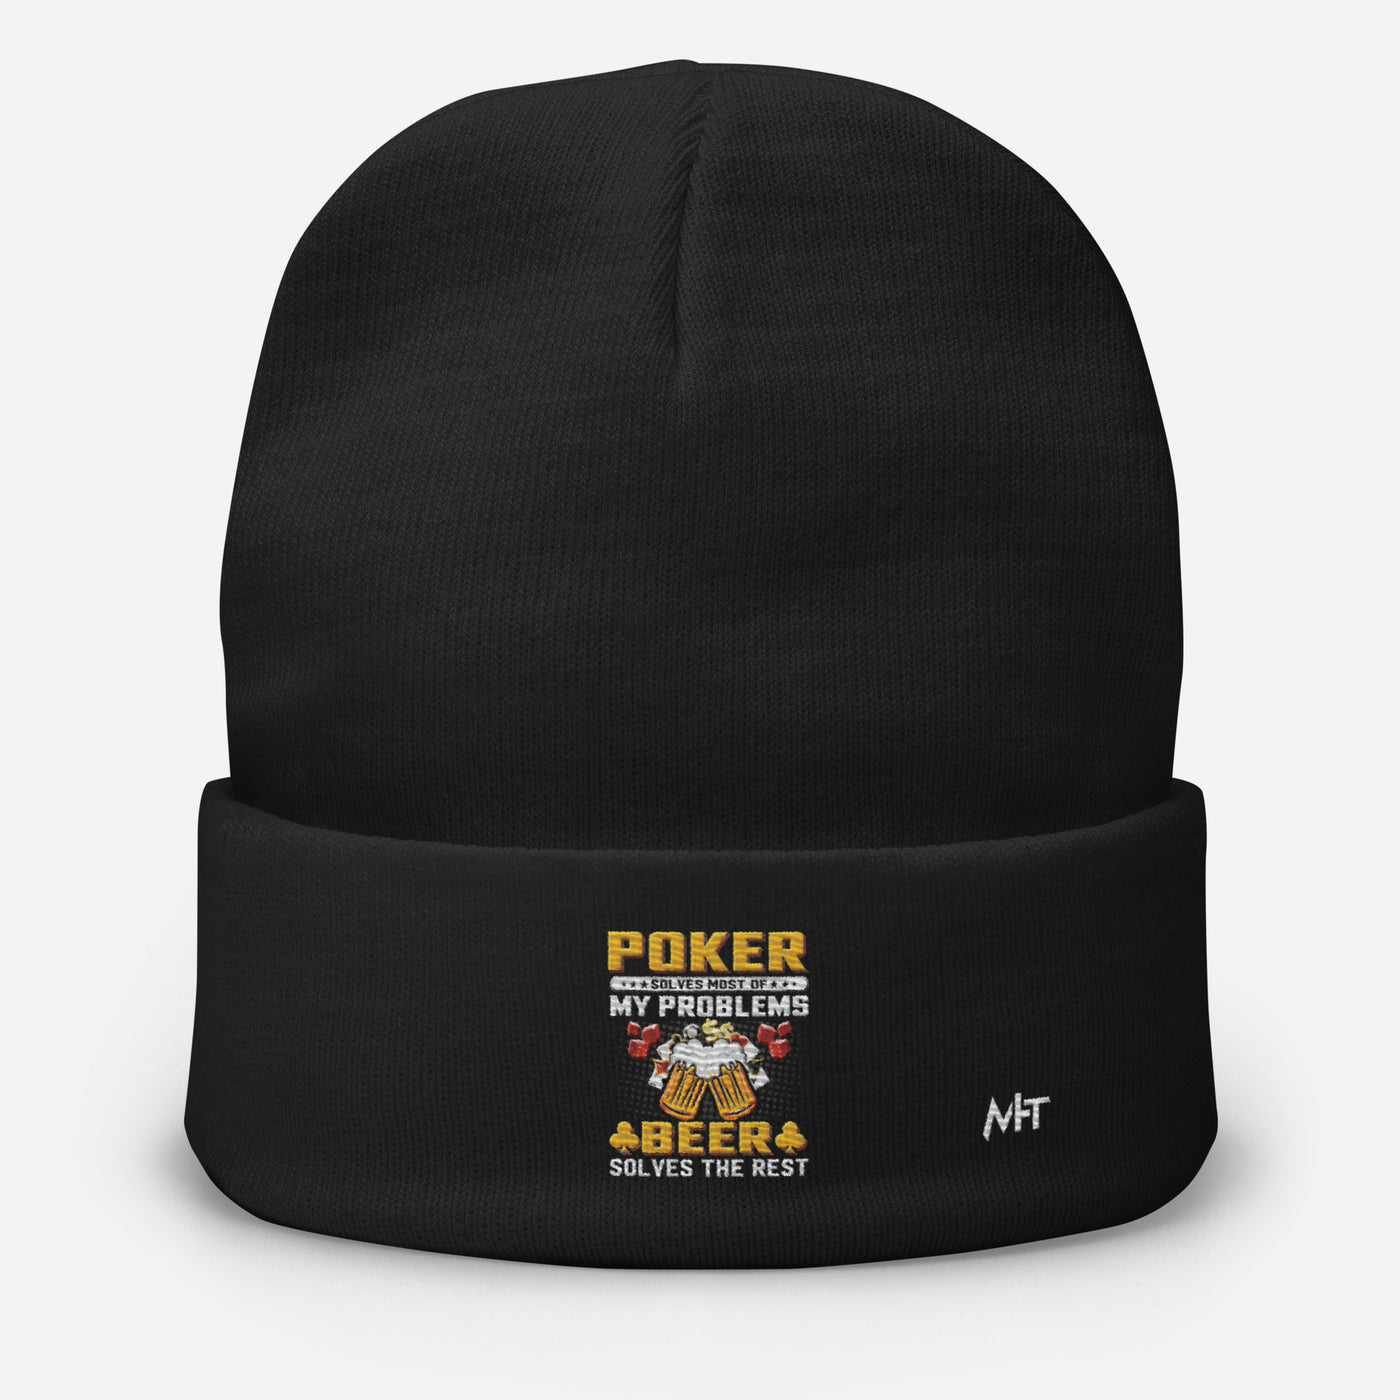 Poker Solves Most of My Problems, but Beer Solves the Rest - Embroidered Beanie